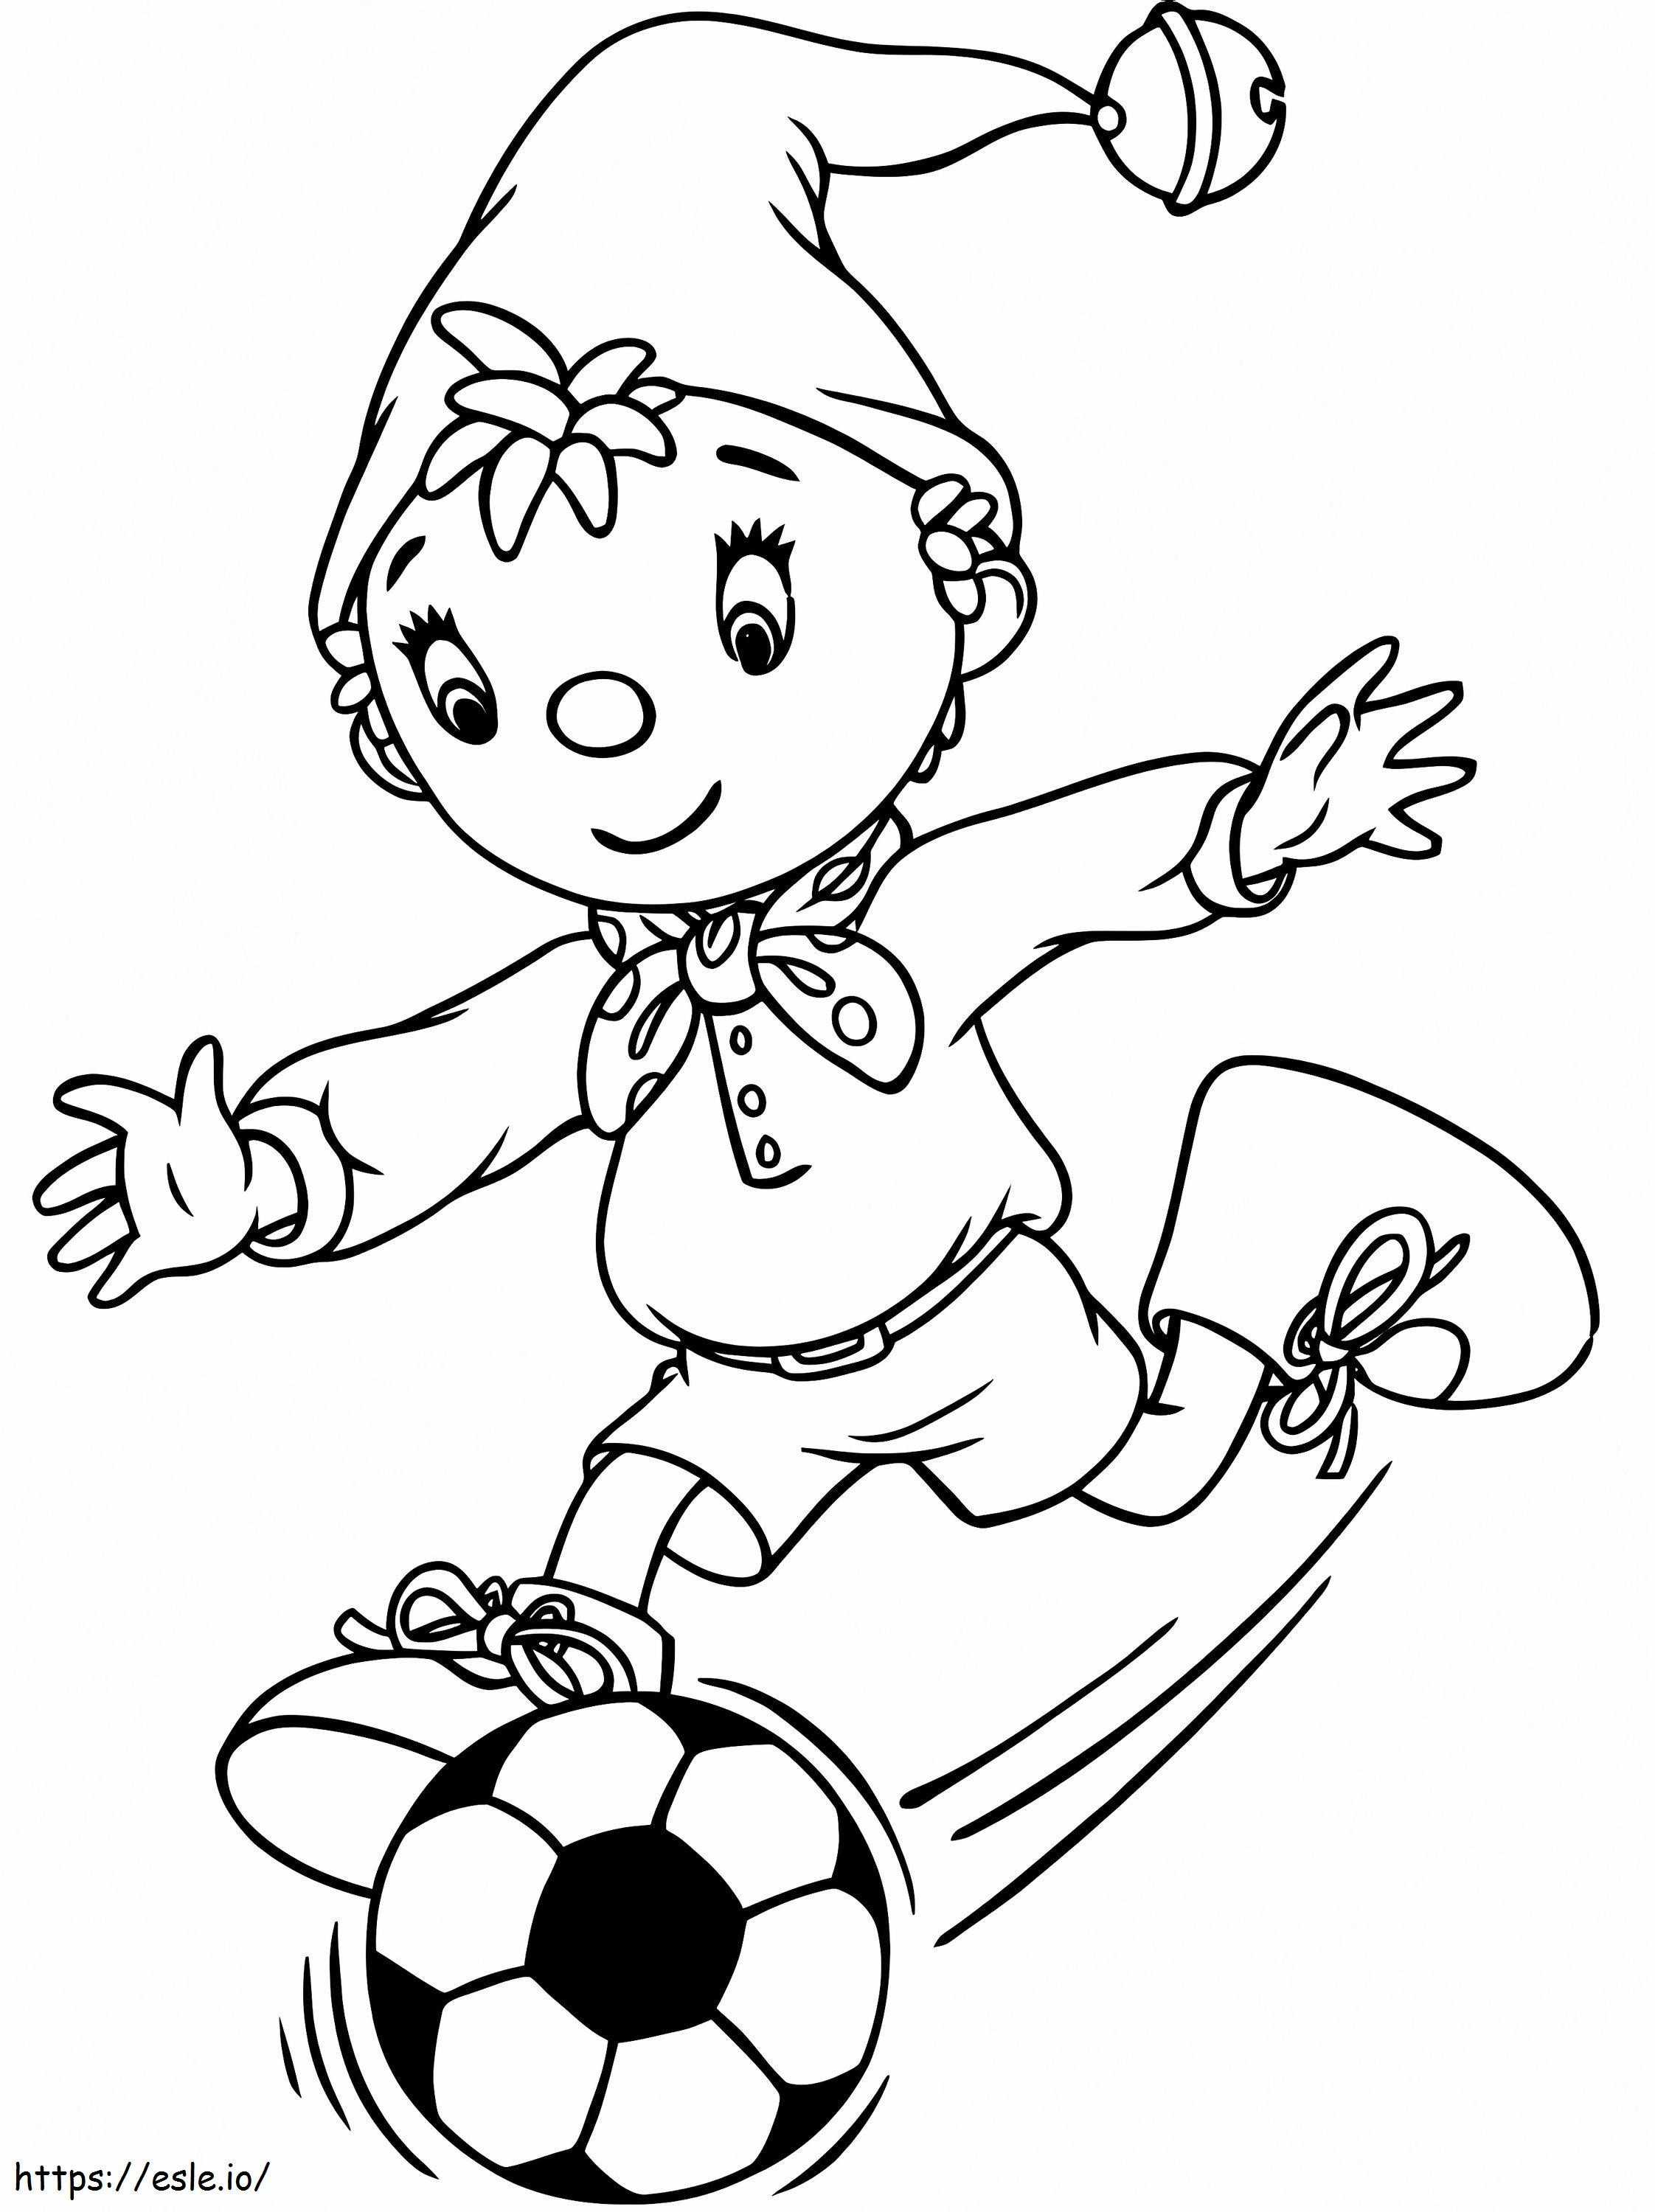 35B14D217346A04569A59C321342Eeae coloring page